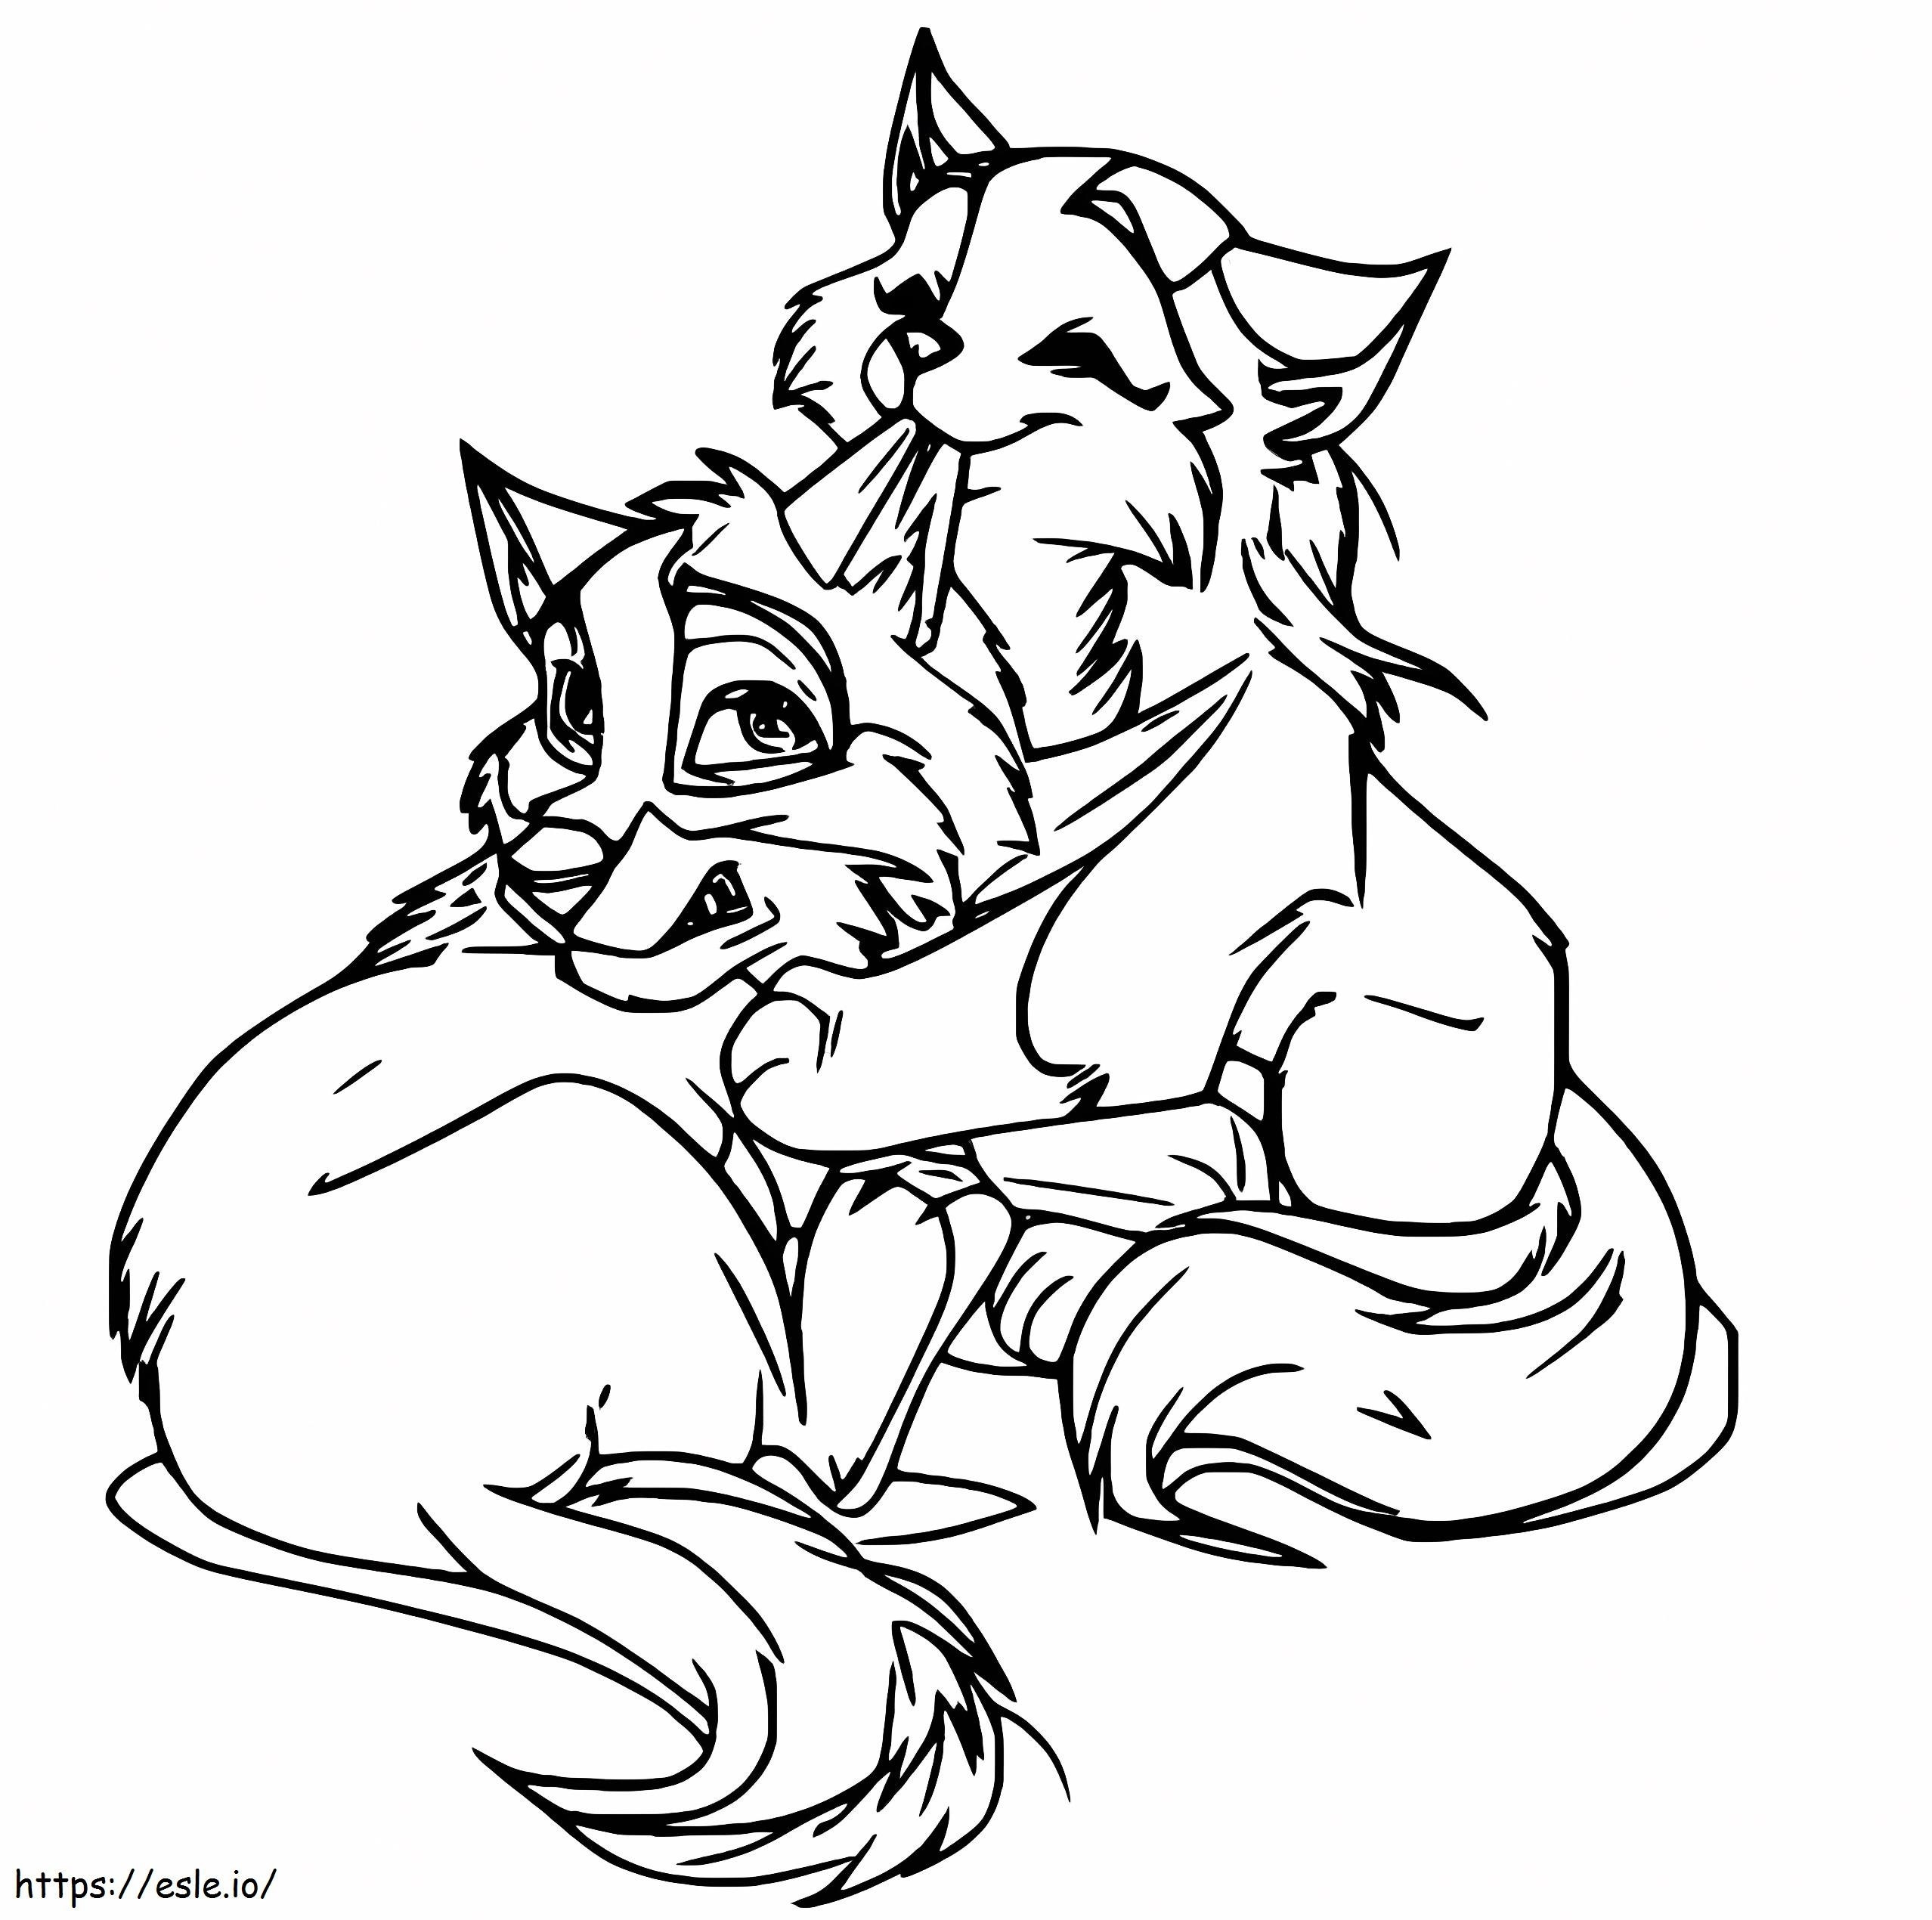 Puppies From Balto coloring page